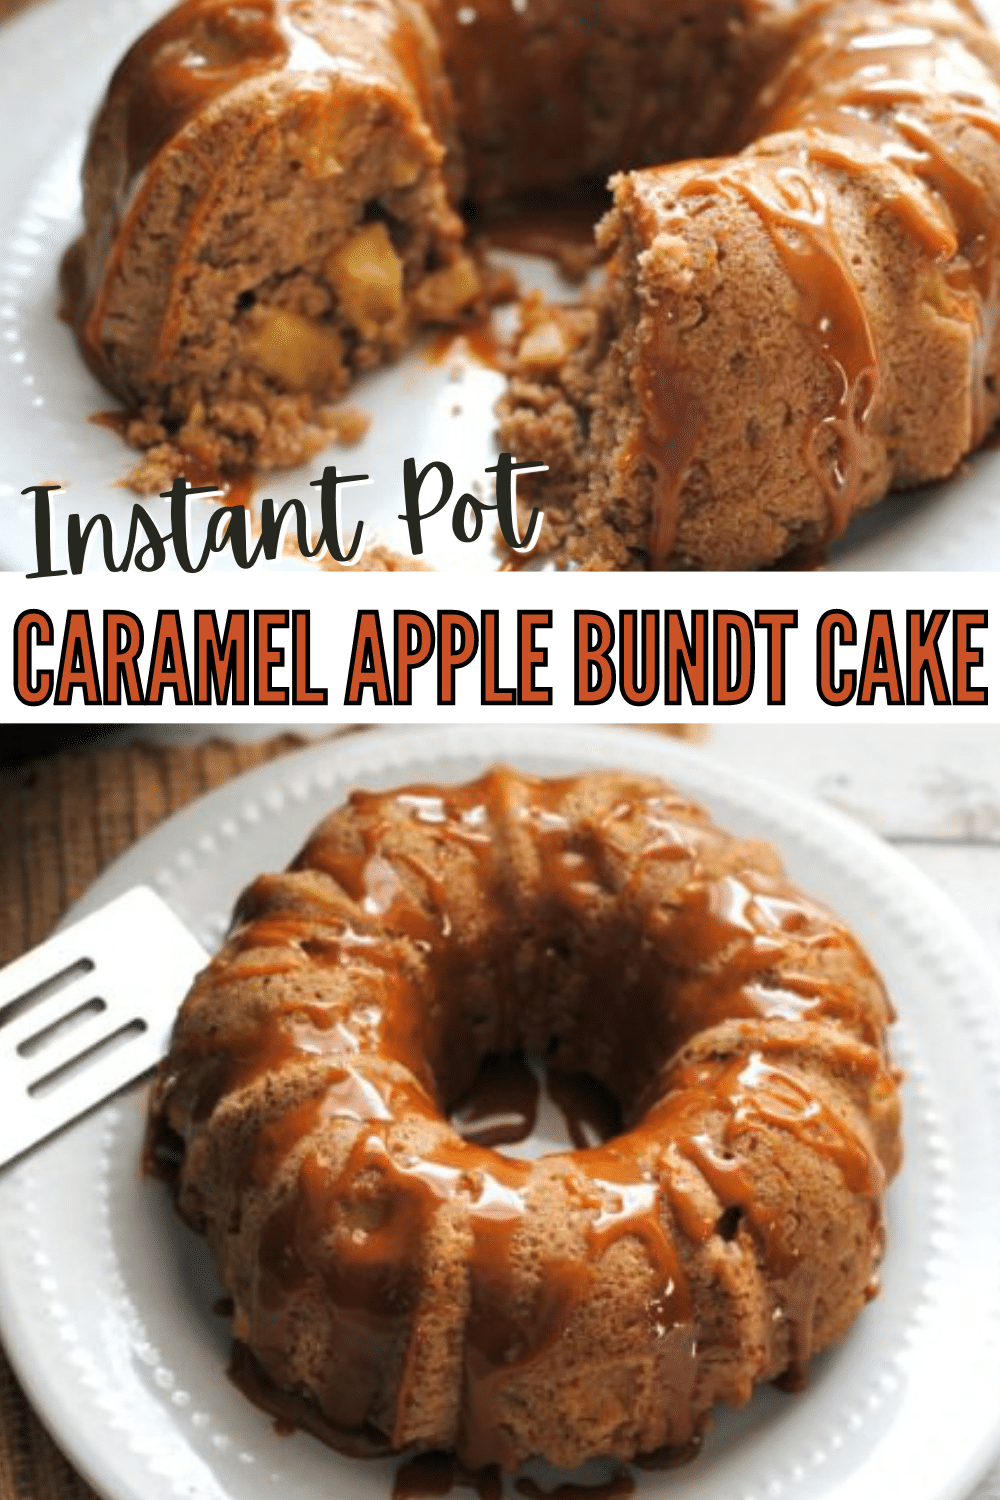 Use your Instant Pot to make this moist, delicious Caramel Apple Bundt Cake. No need to heat up the kitchen by running the oven for an hour! #instantpot #pressurecooker #caramelapple #cake via @wondermomwannab